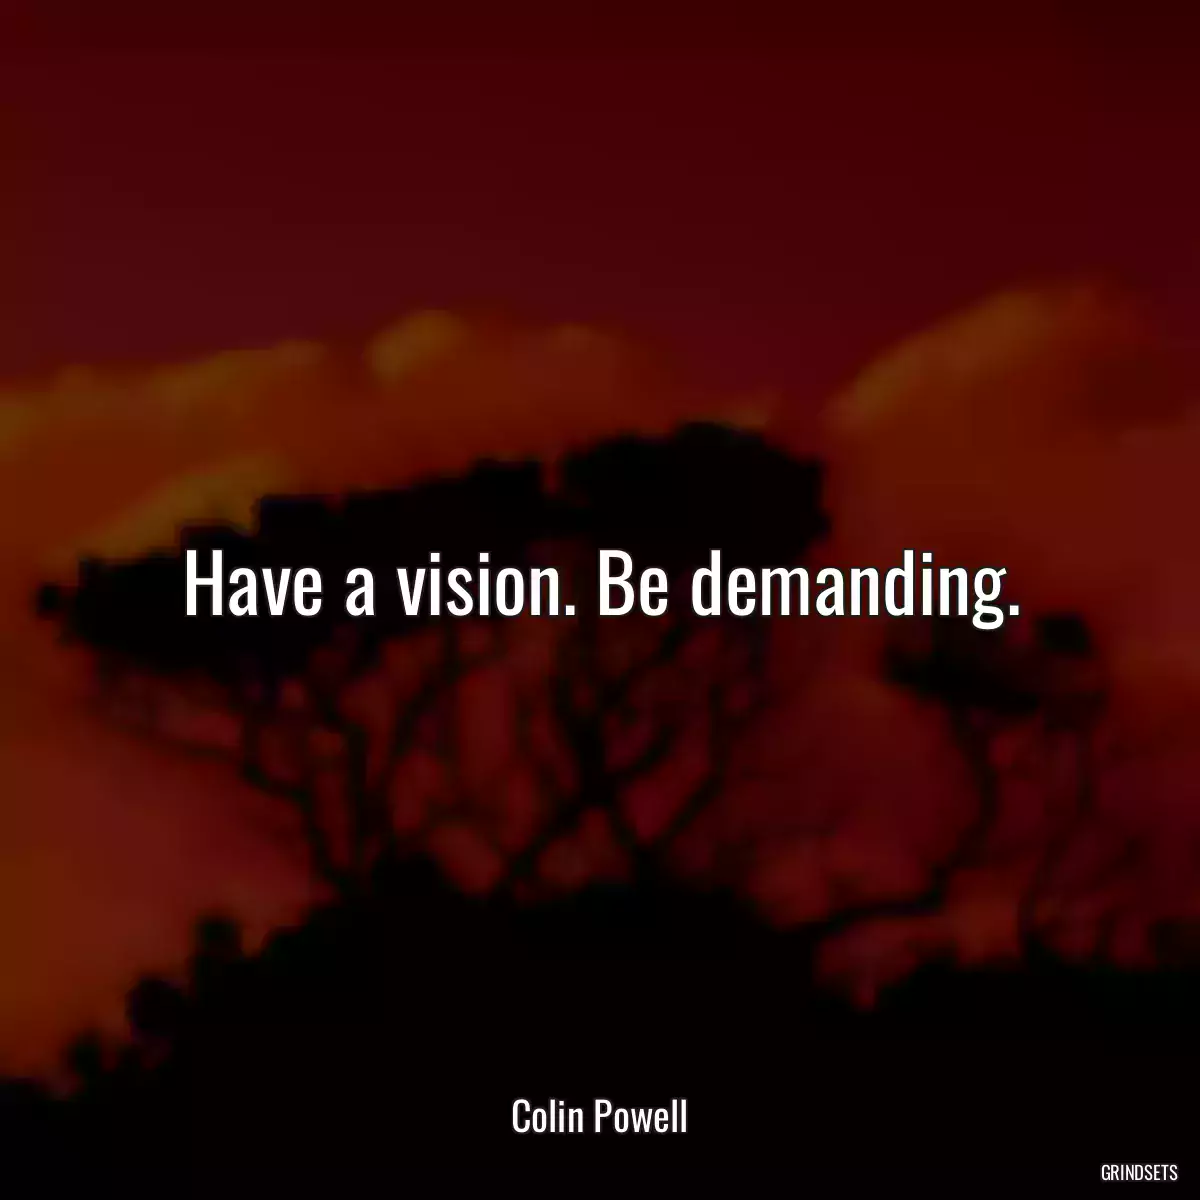 Have a vision. Be demanding.